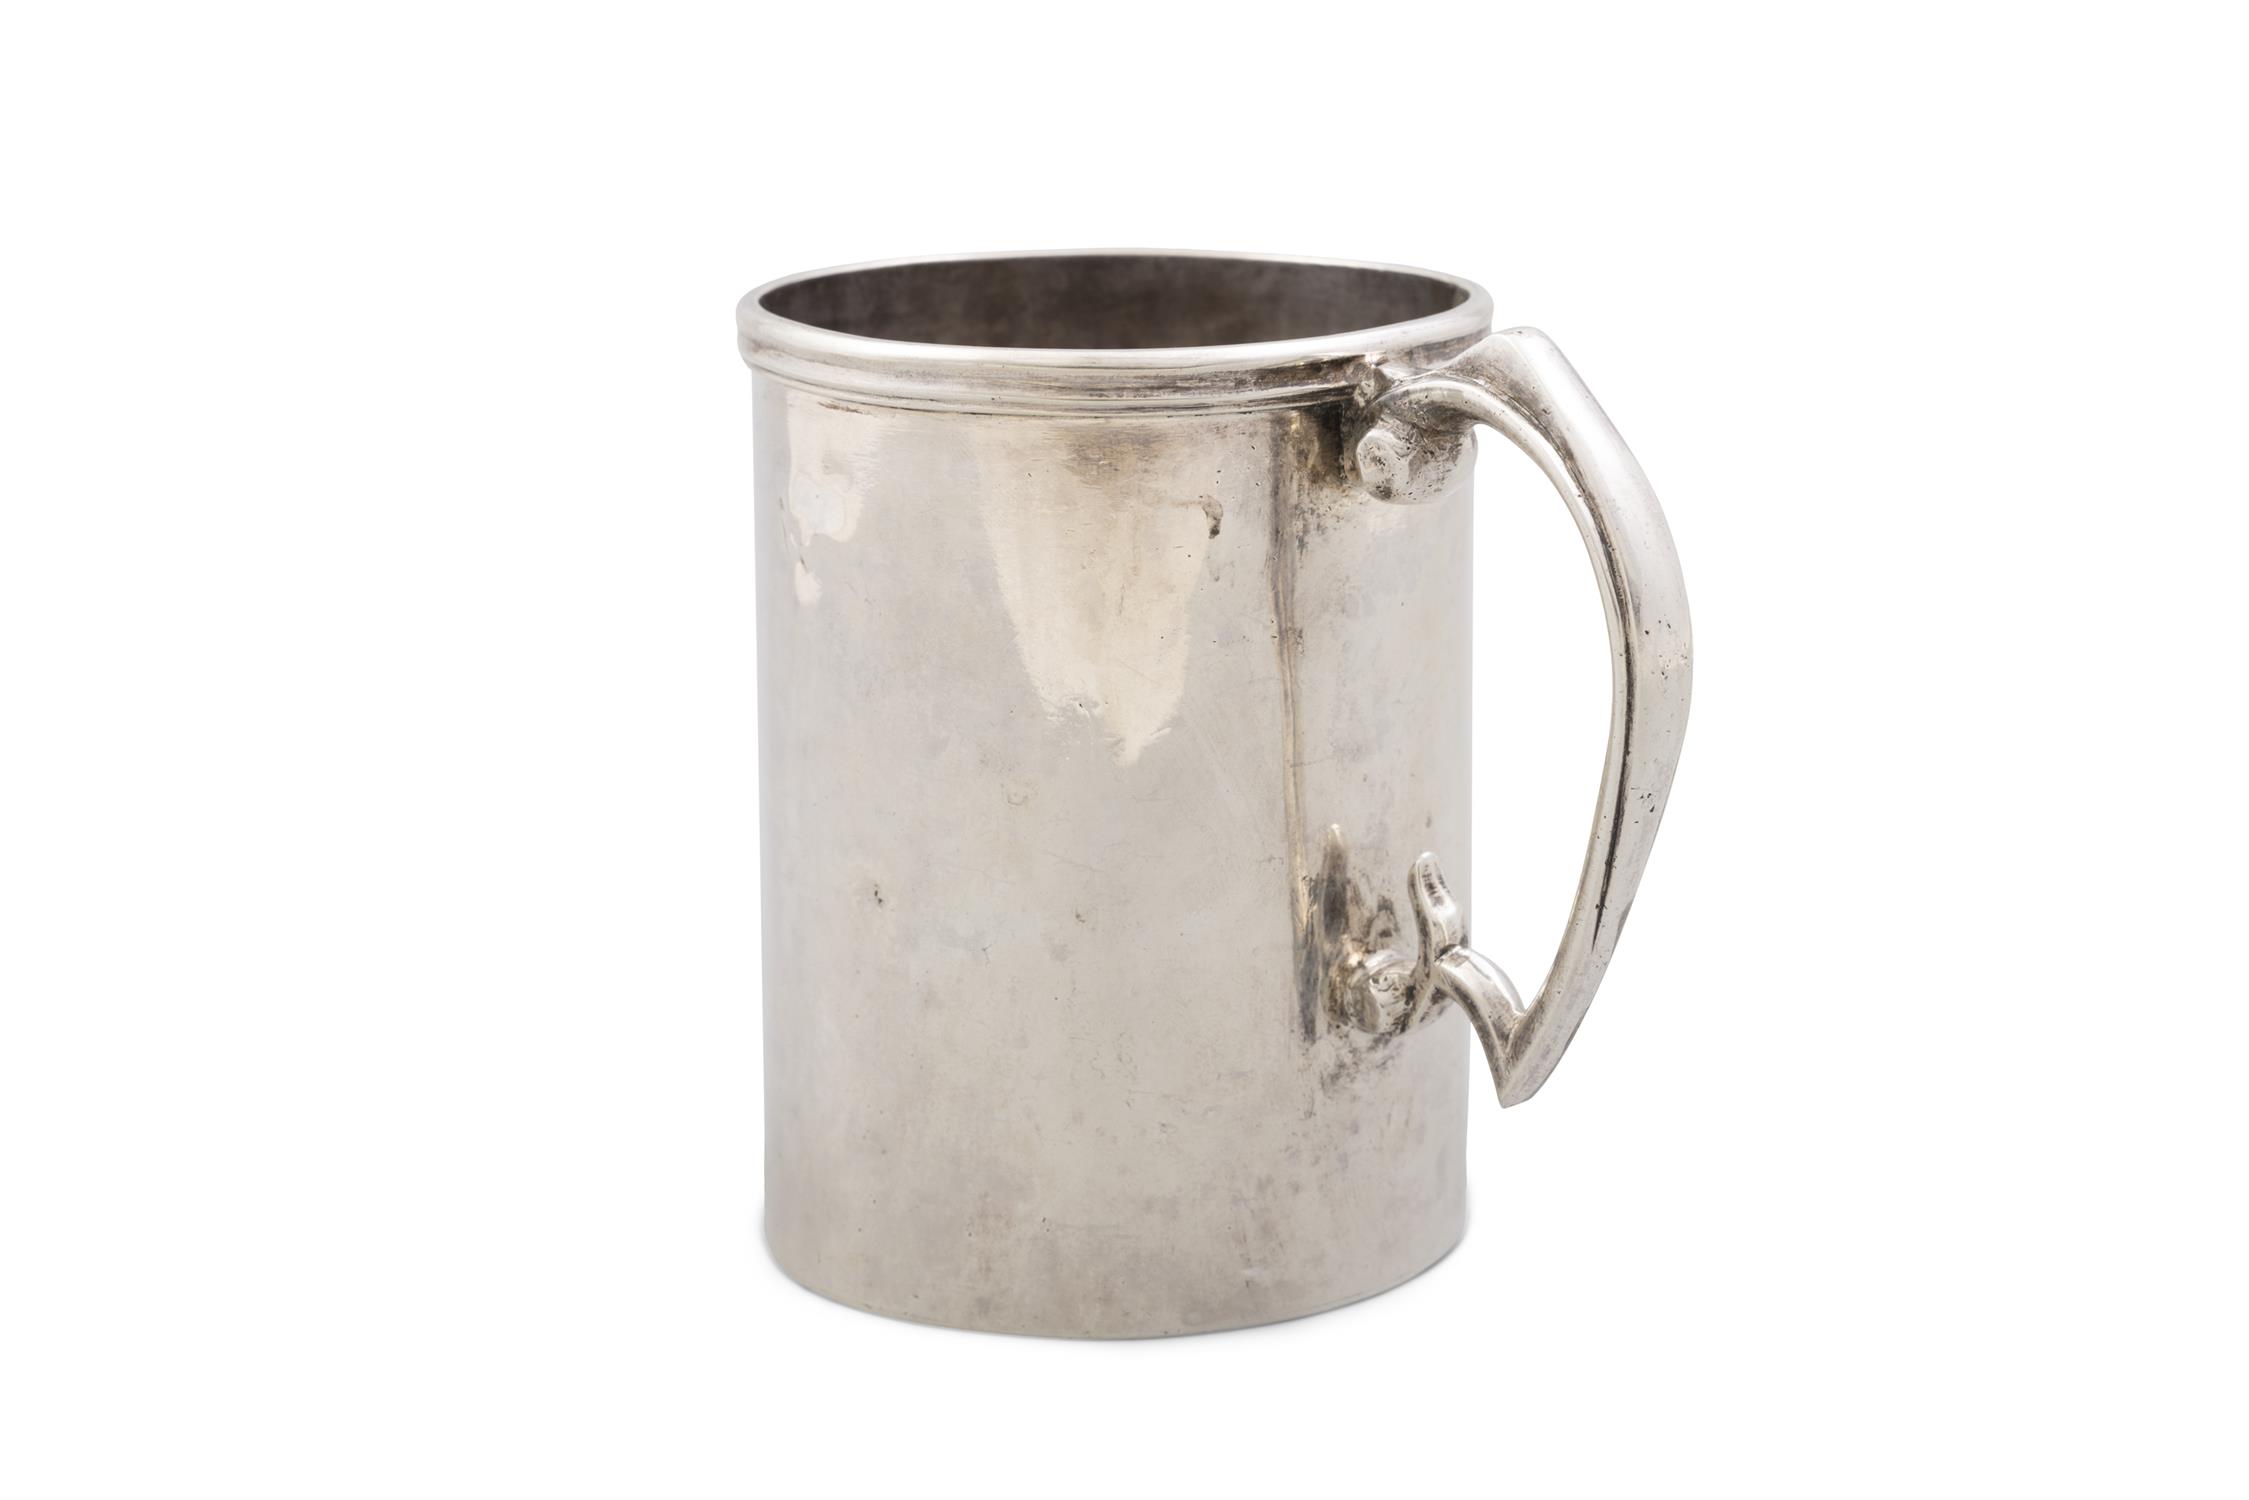 A PROVINCIAL IRISH SILVER BEER TANKARD, with 'P. R.' marking at the base. (17.82 troy oz) 12. - Image 2 of 3